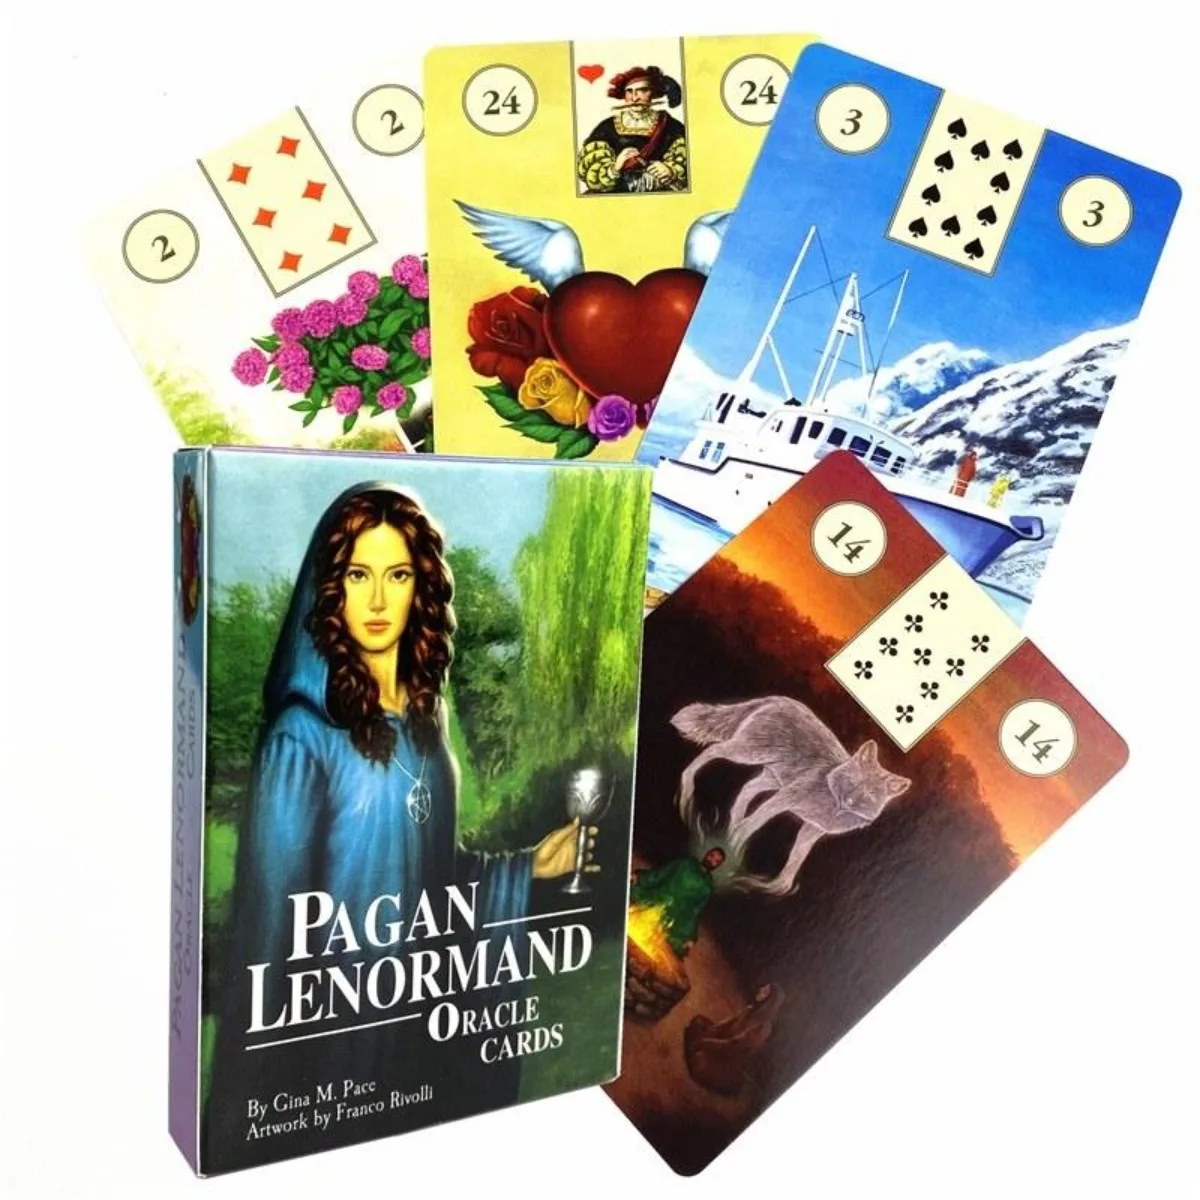 

Pagan Lenormand Oracle Cards Full English Classic Board Games Imaginative Oracle Divination Fat Game Tarot Cards With PDF